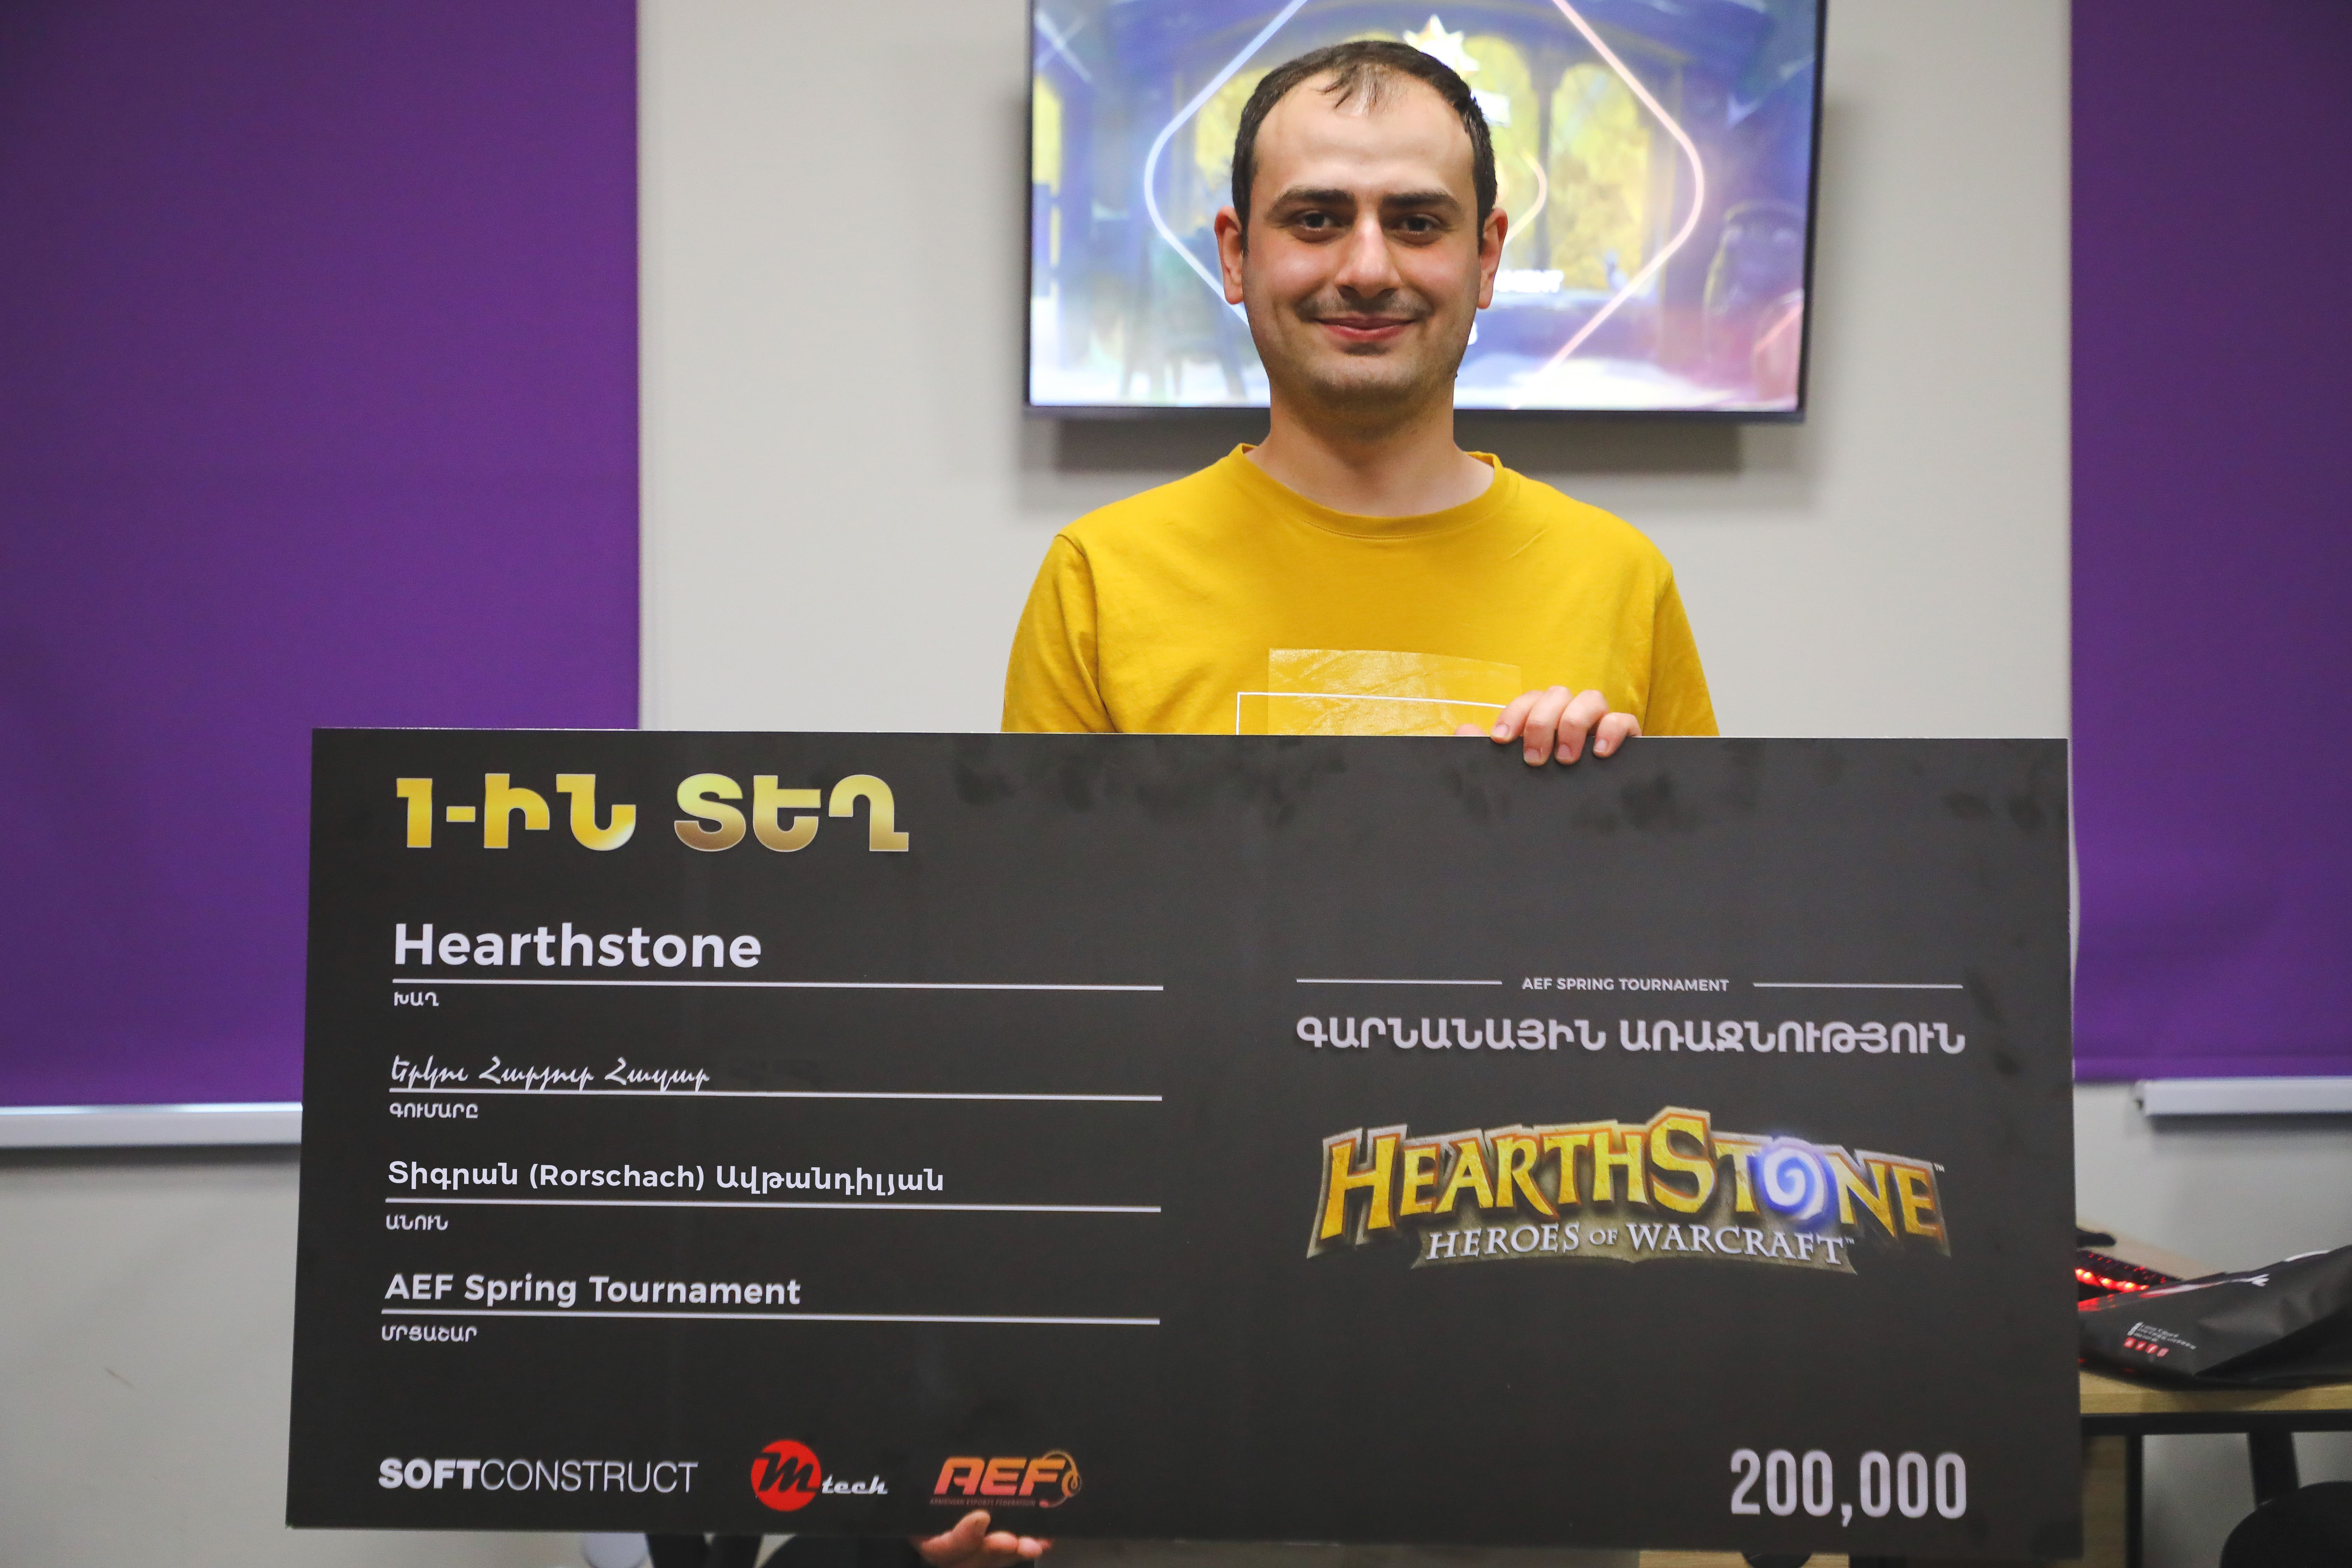 Hearthstone Spring Tournament was held on May 22 and 23 